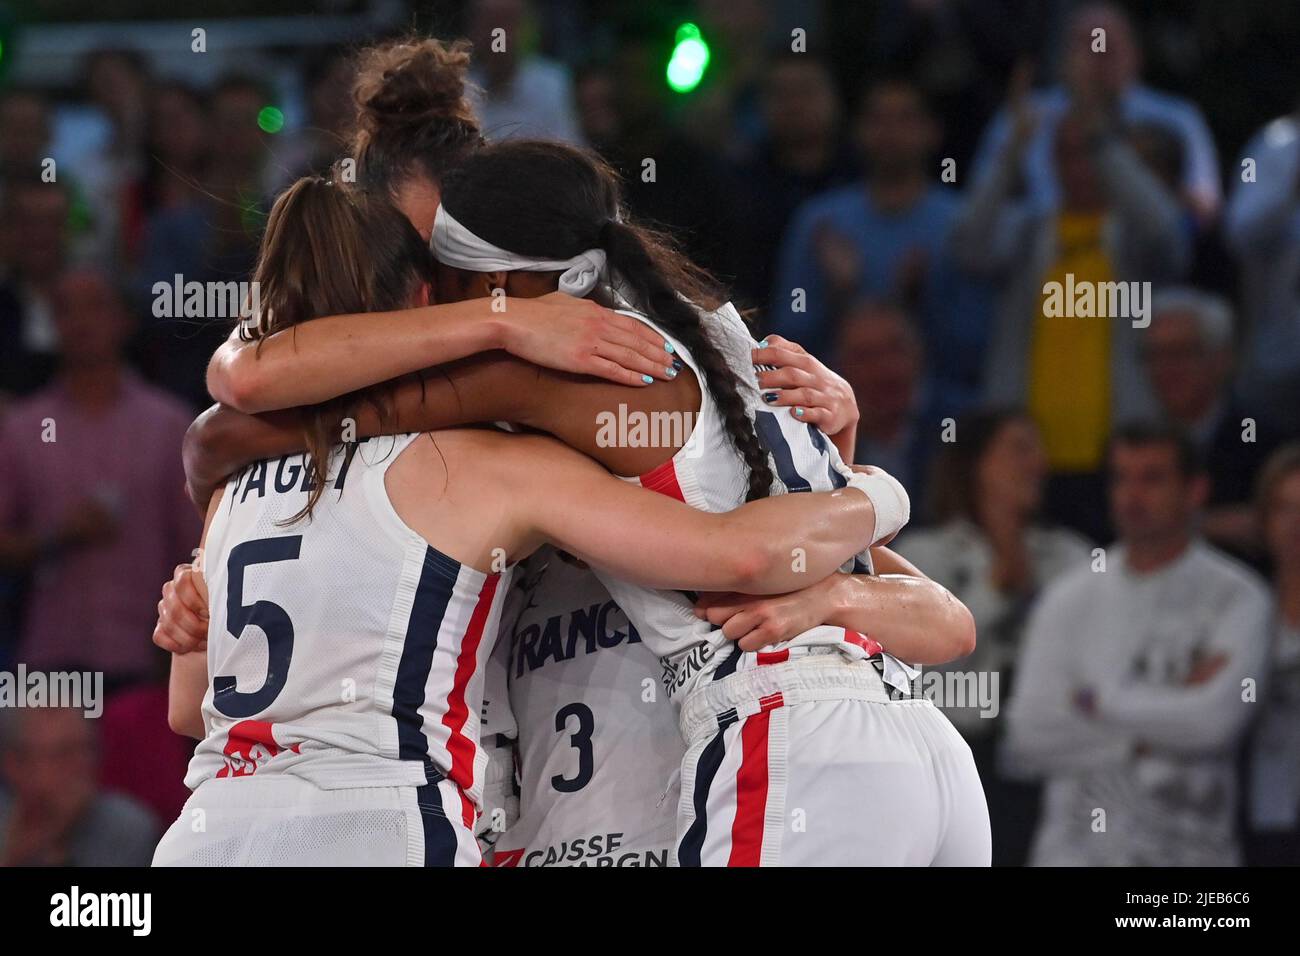 French Myriam Djekoundade, French Hortense Limouzin, French Laetitia Guapo and French Hortense Limouzin celebrate after winning a 3x3 basketball game between France and Canada, in the Women's final at the FIBA 2022 world cup, Sunday 26 June 2022, in Antwerp. The FIBA 3x3 Basket World Cup 2022 takes place from 21 to 26 June in Antwerp. BELGA PHOTO DIRK WAEM Stock Photo